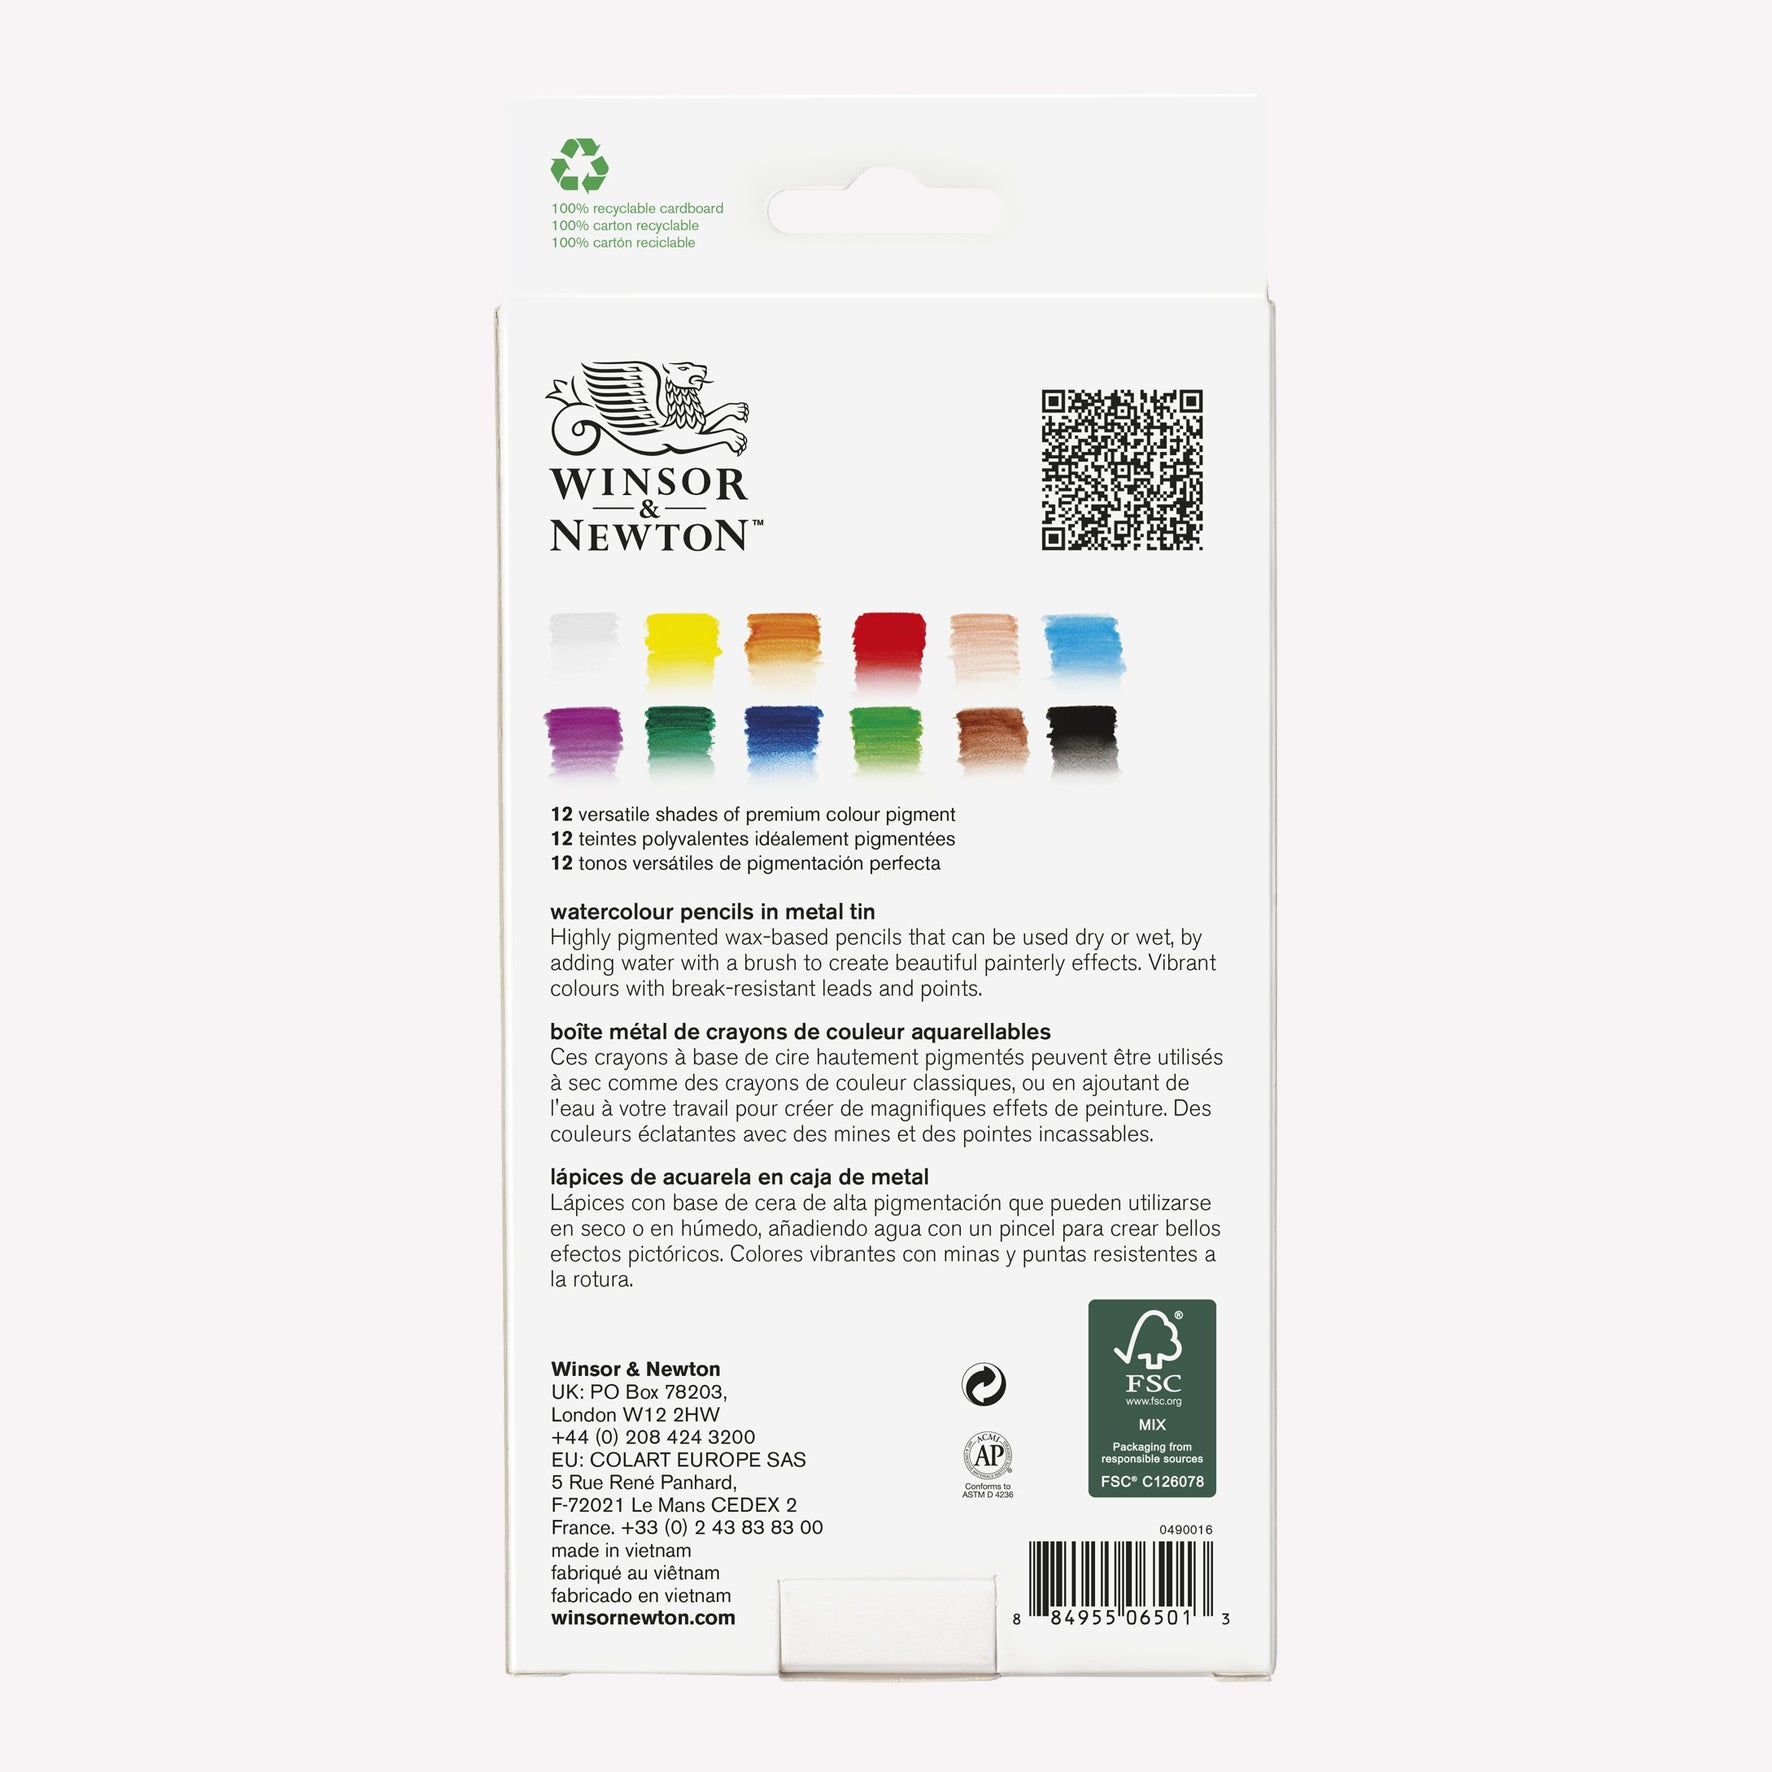 Reverse side of the packaging of Winsor and Newton’s Set of 12 Studio Collection Watercolour pencils with product information and swatches of the 12 tones available in the palette. 